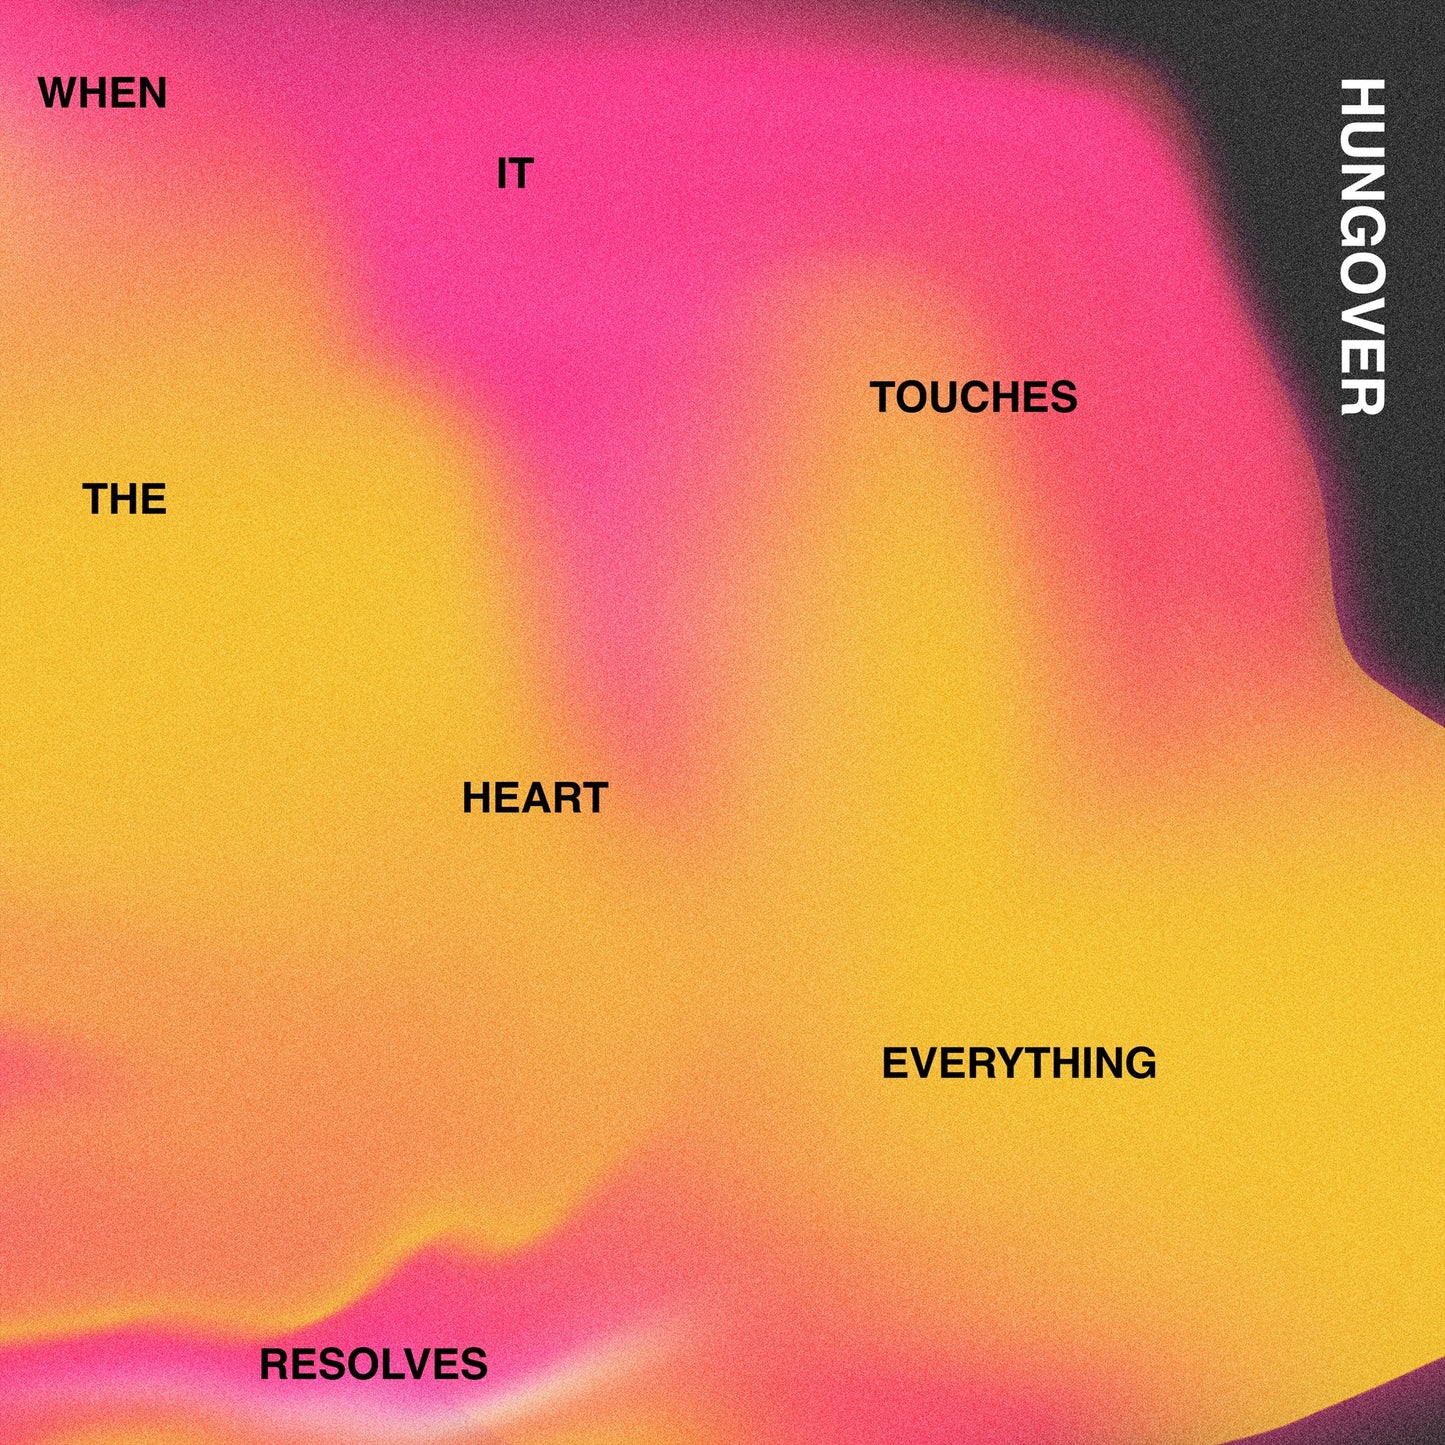 HUNGOVER "When It Touches The Heart, Everything Resolves" LP